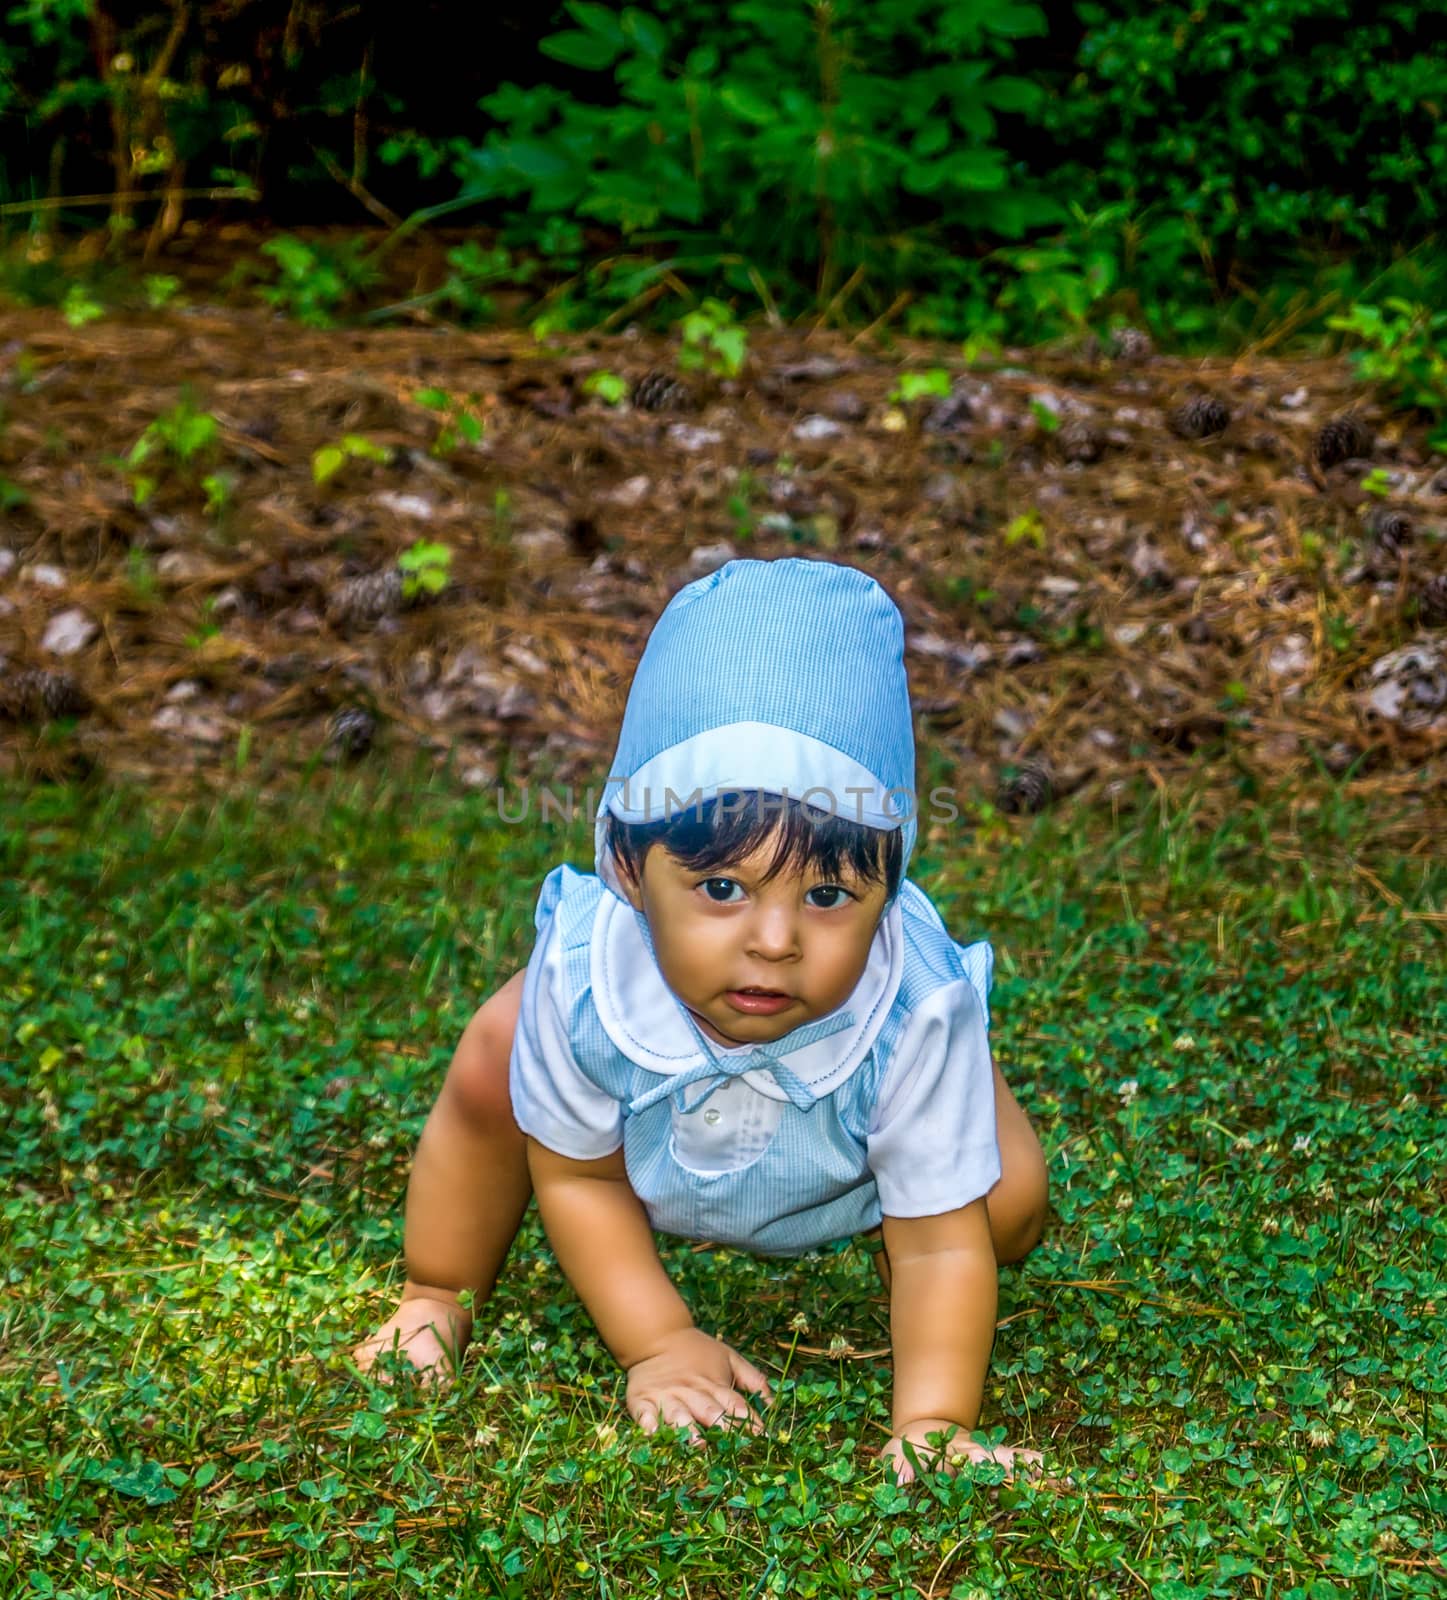 Latino baby dressed up and crawling outside in the grass